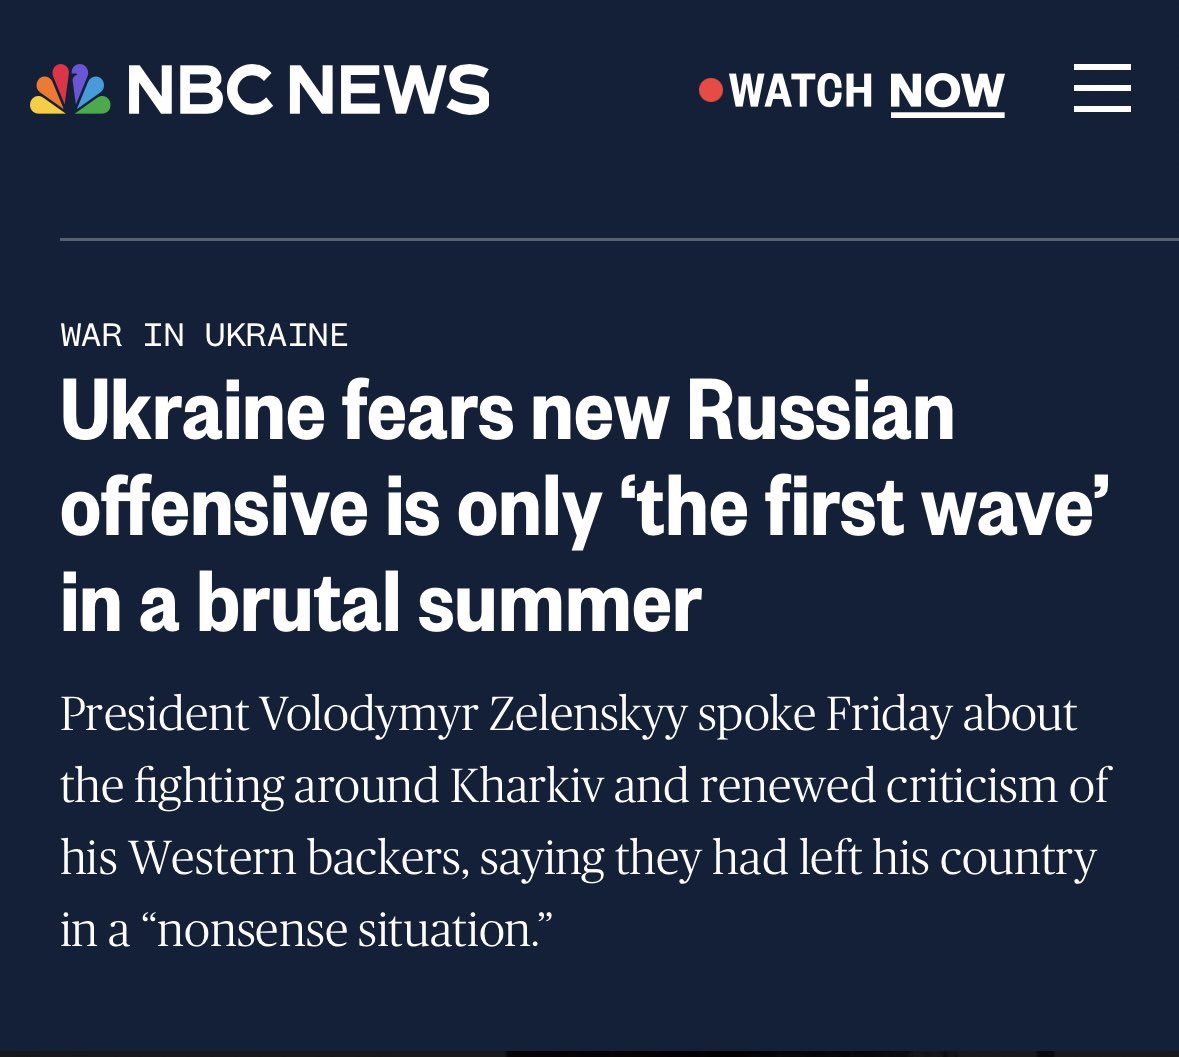 “Zelenskyy also renewed criticism of his Western backers, saying they had left his country in a 'nonsense situation' where it gets enough support to avoid total defeat, but not enough to achieve victory.” Yes, Zelensky. It’s called forever war. It’s what we do. 2+ years later